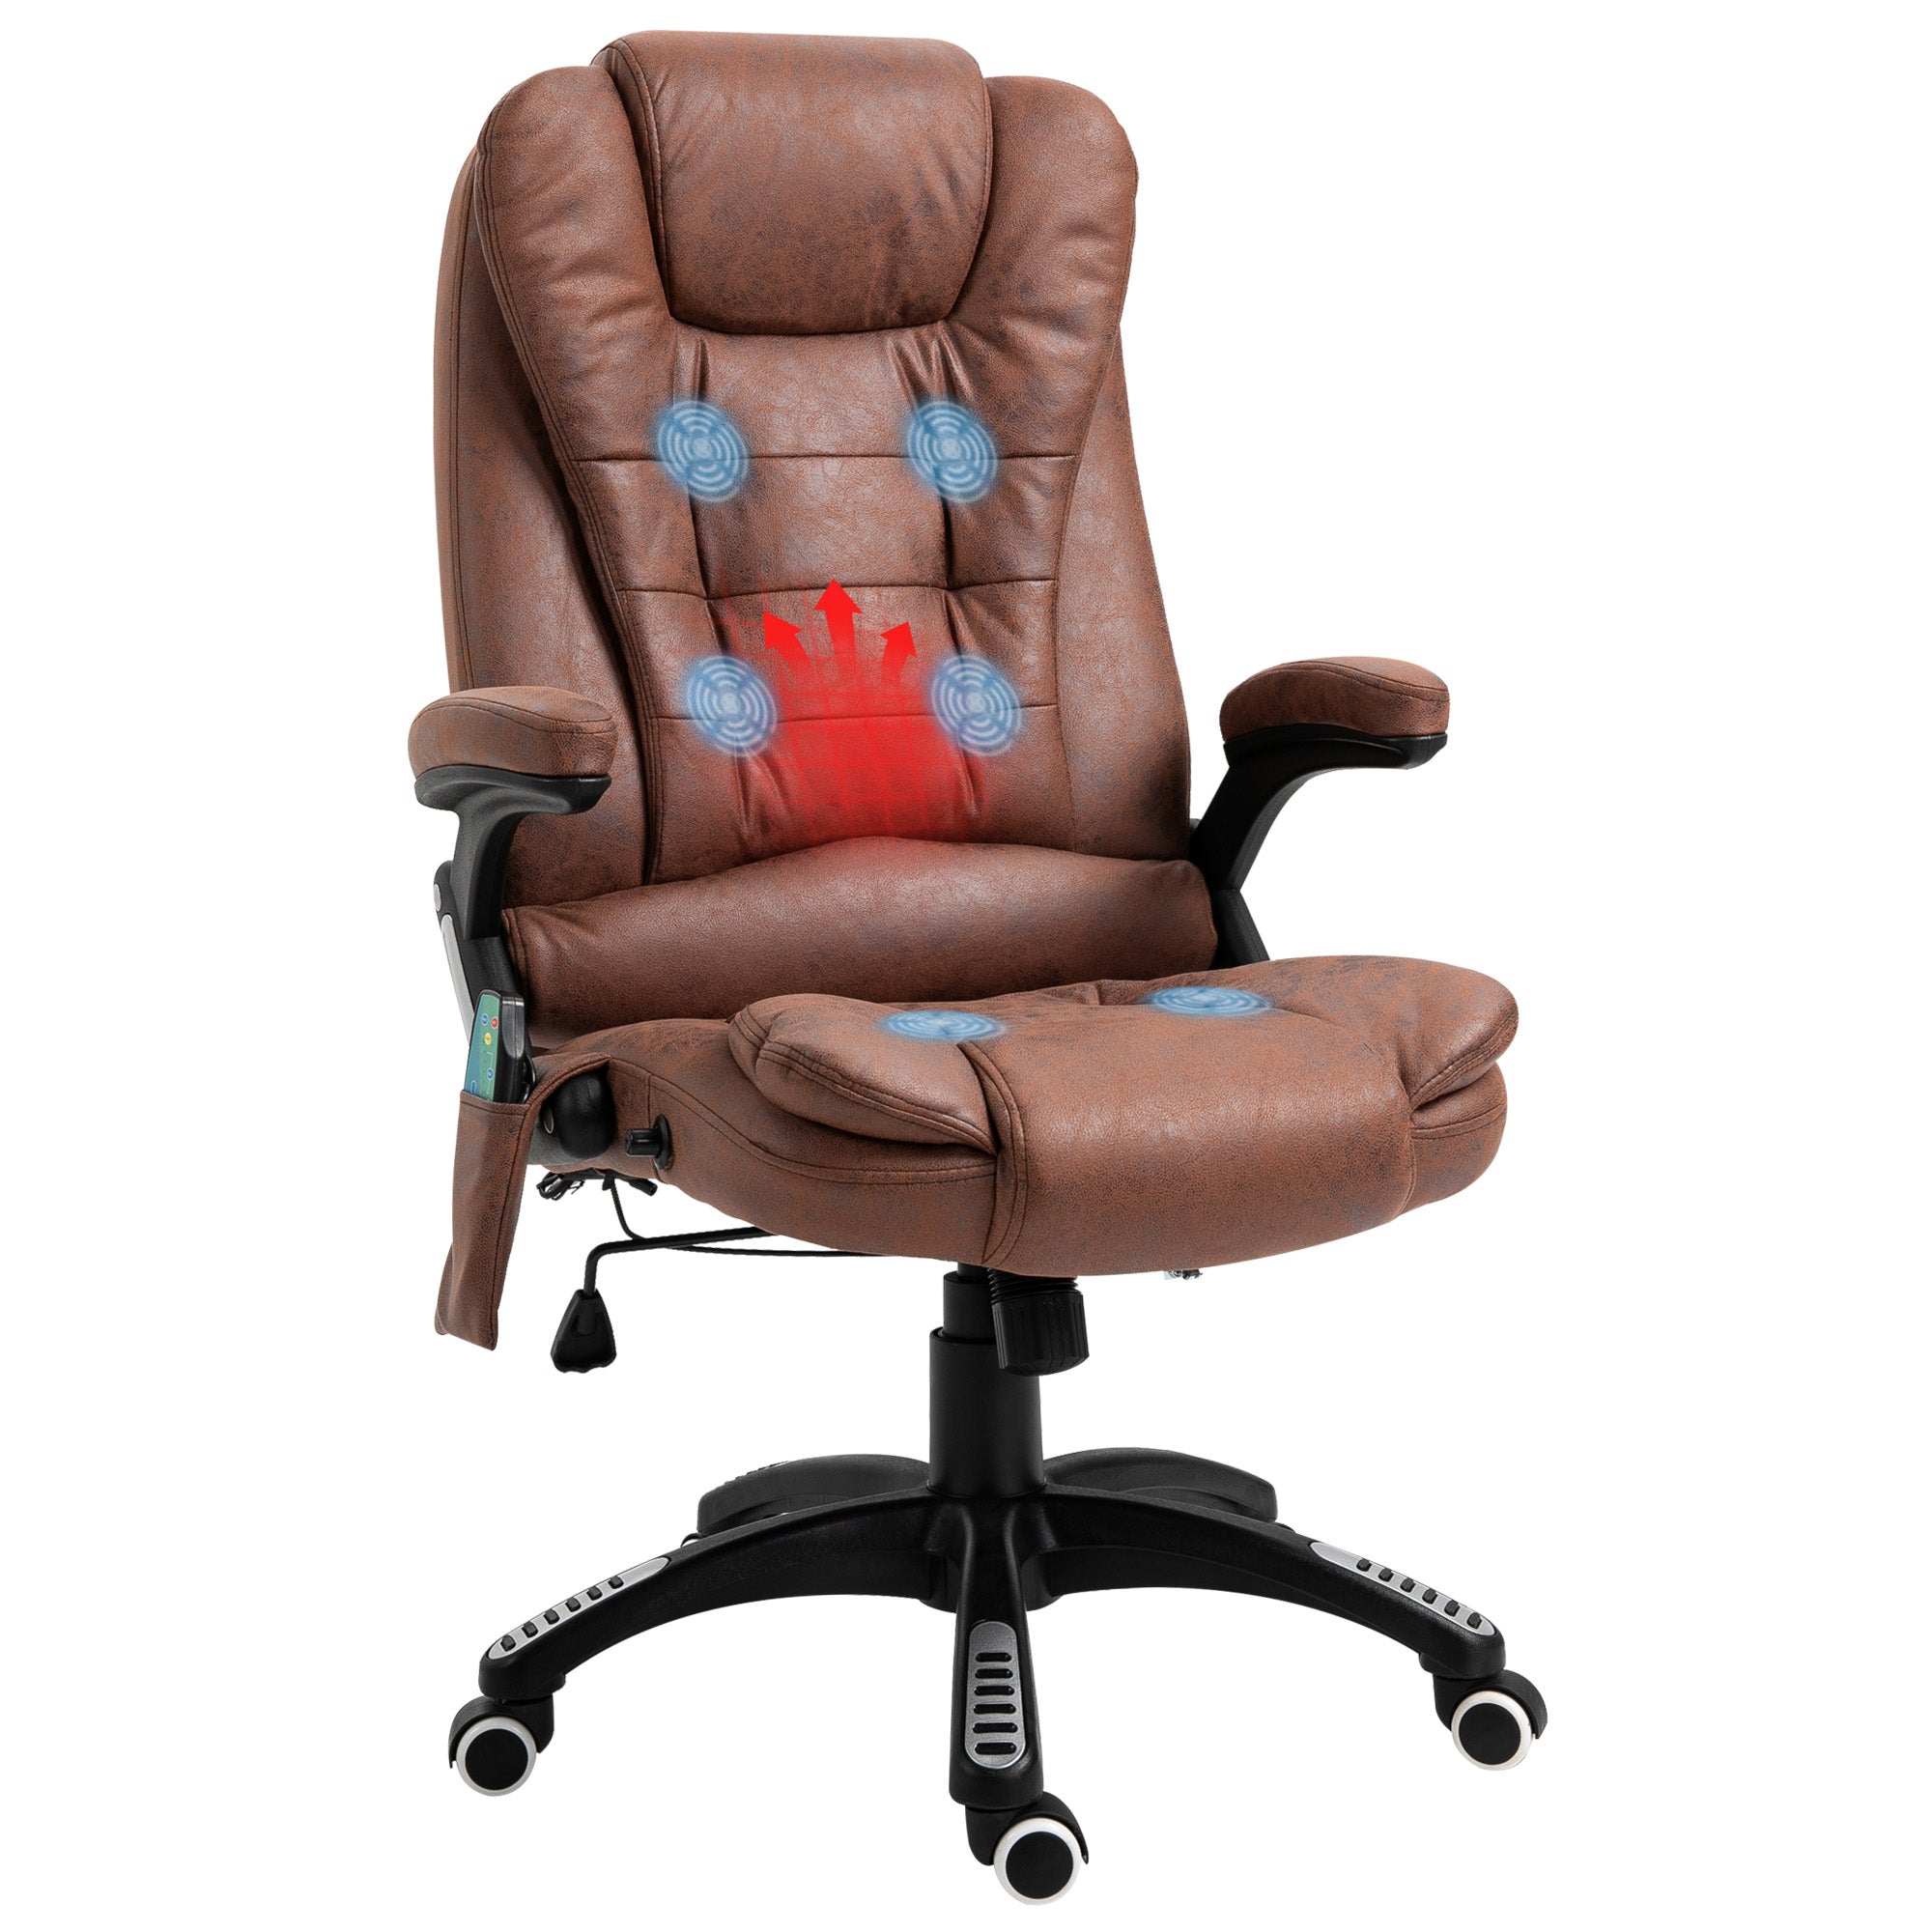 Vinsetto Office Chair w/ Heating Massage Points Relaxing Reclining Brown  | TJ Hughes